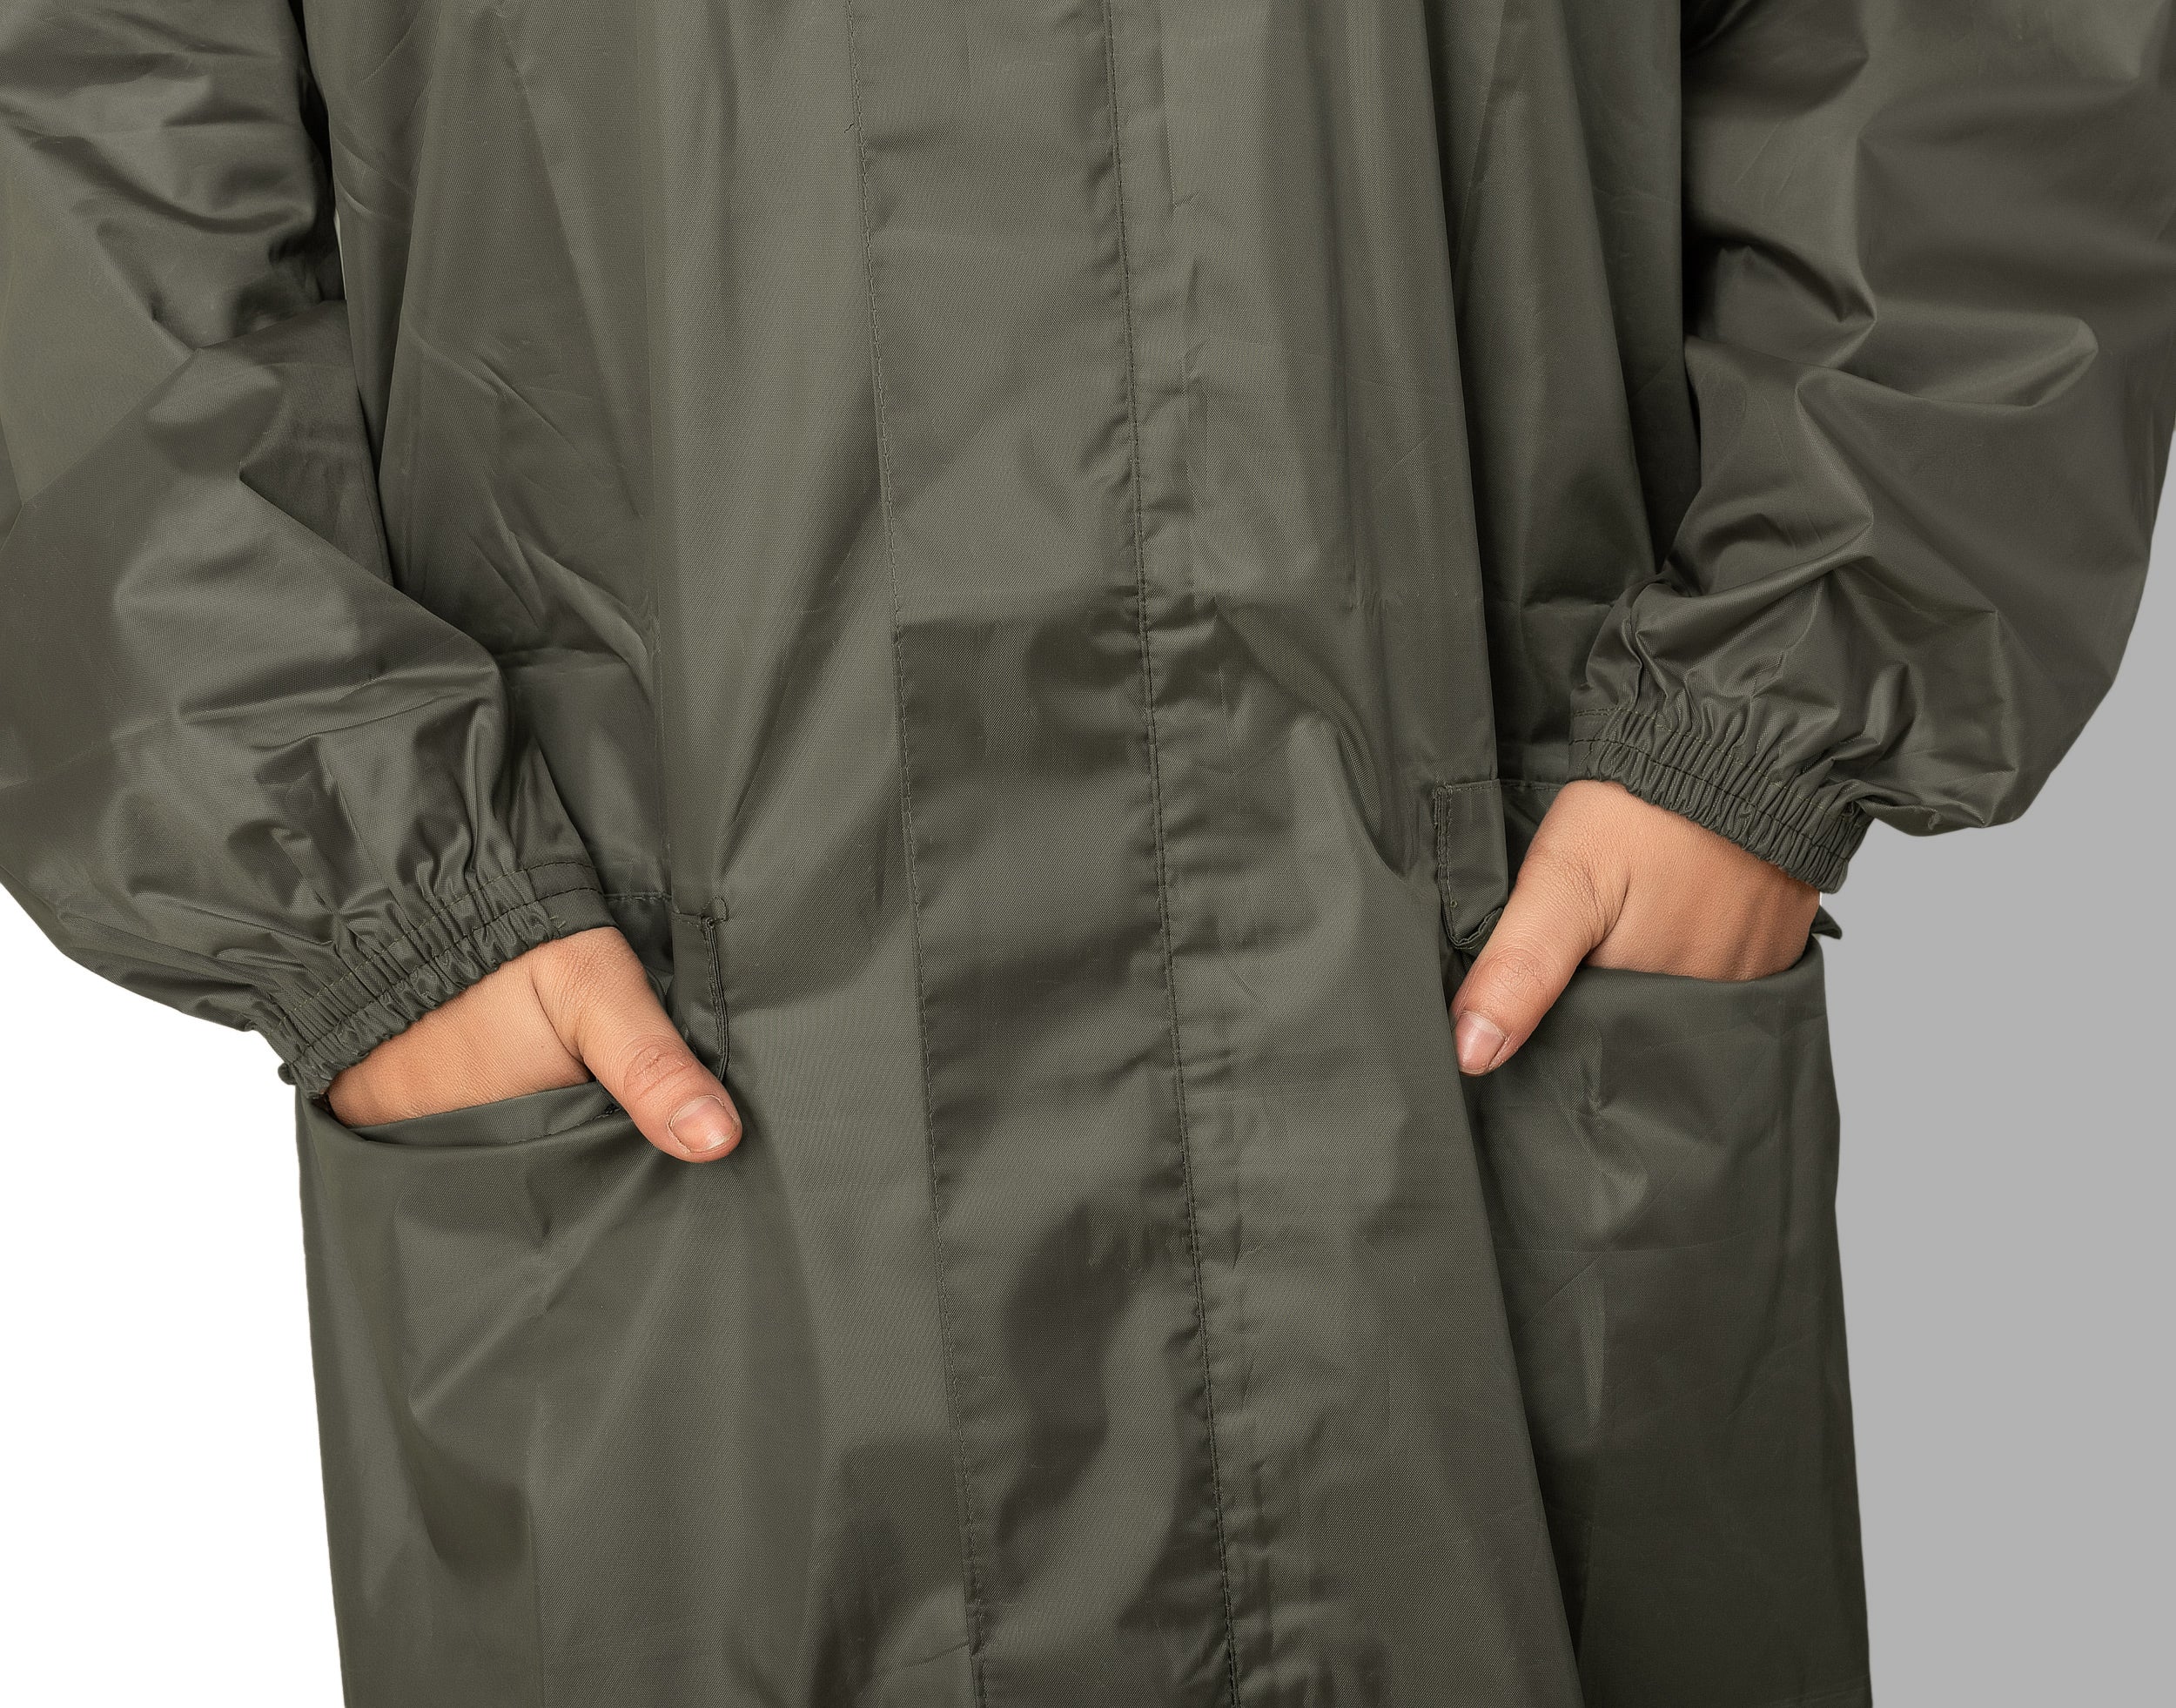 The Dry Cape Camping: Women's Waterproof Raincoat - Enhanced Mobility for Bikers